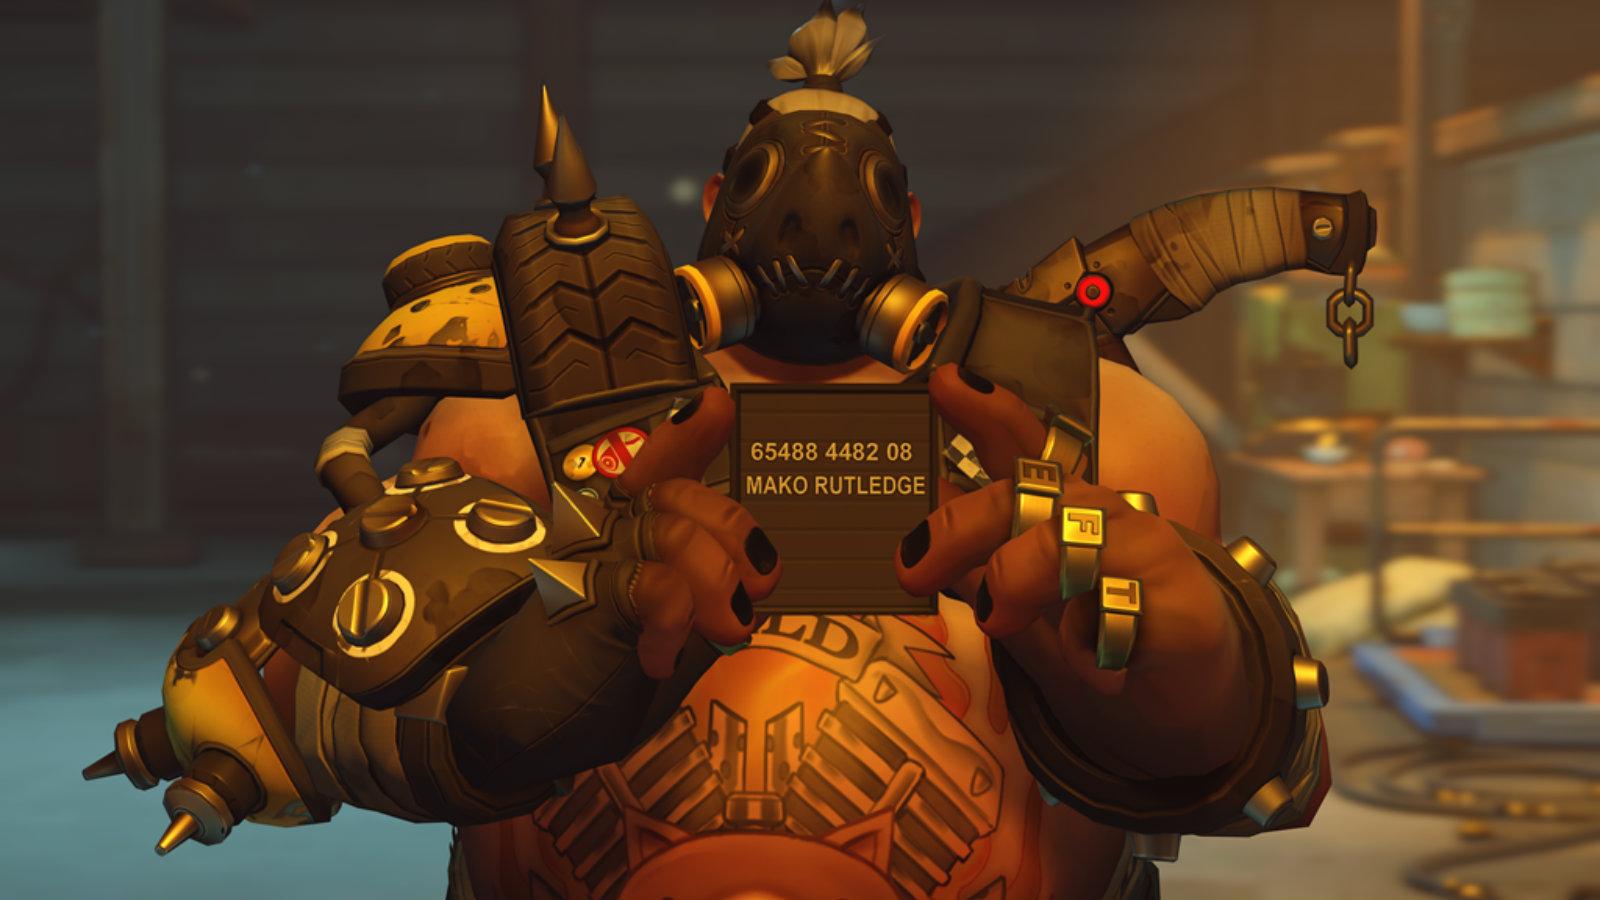 Roadhog is planned for a rework in ow2